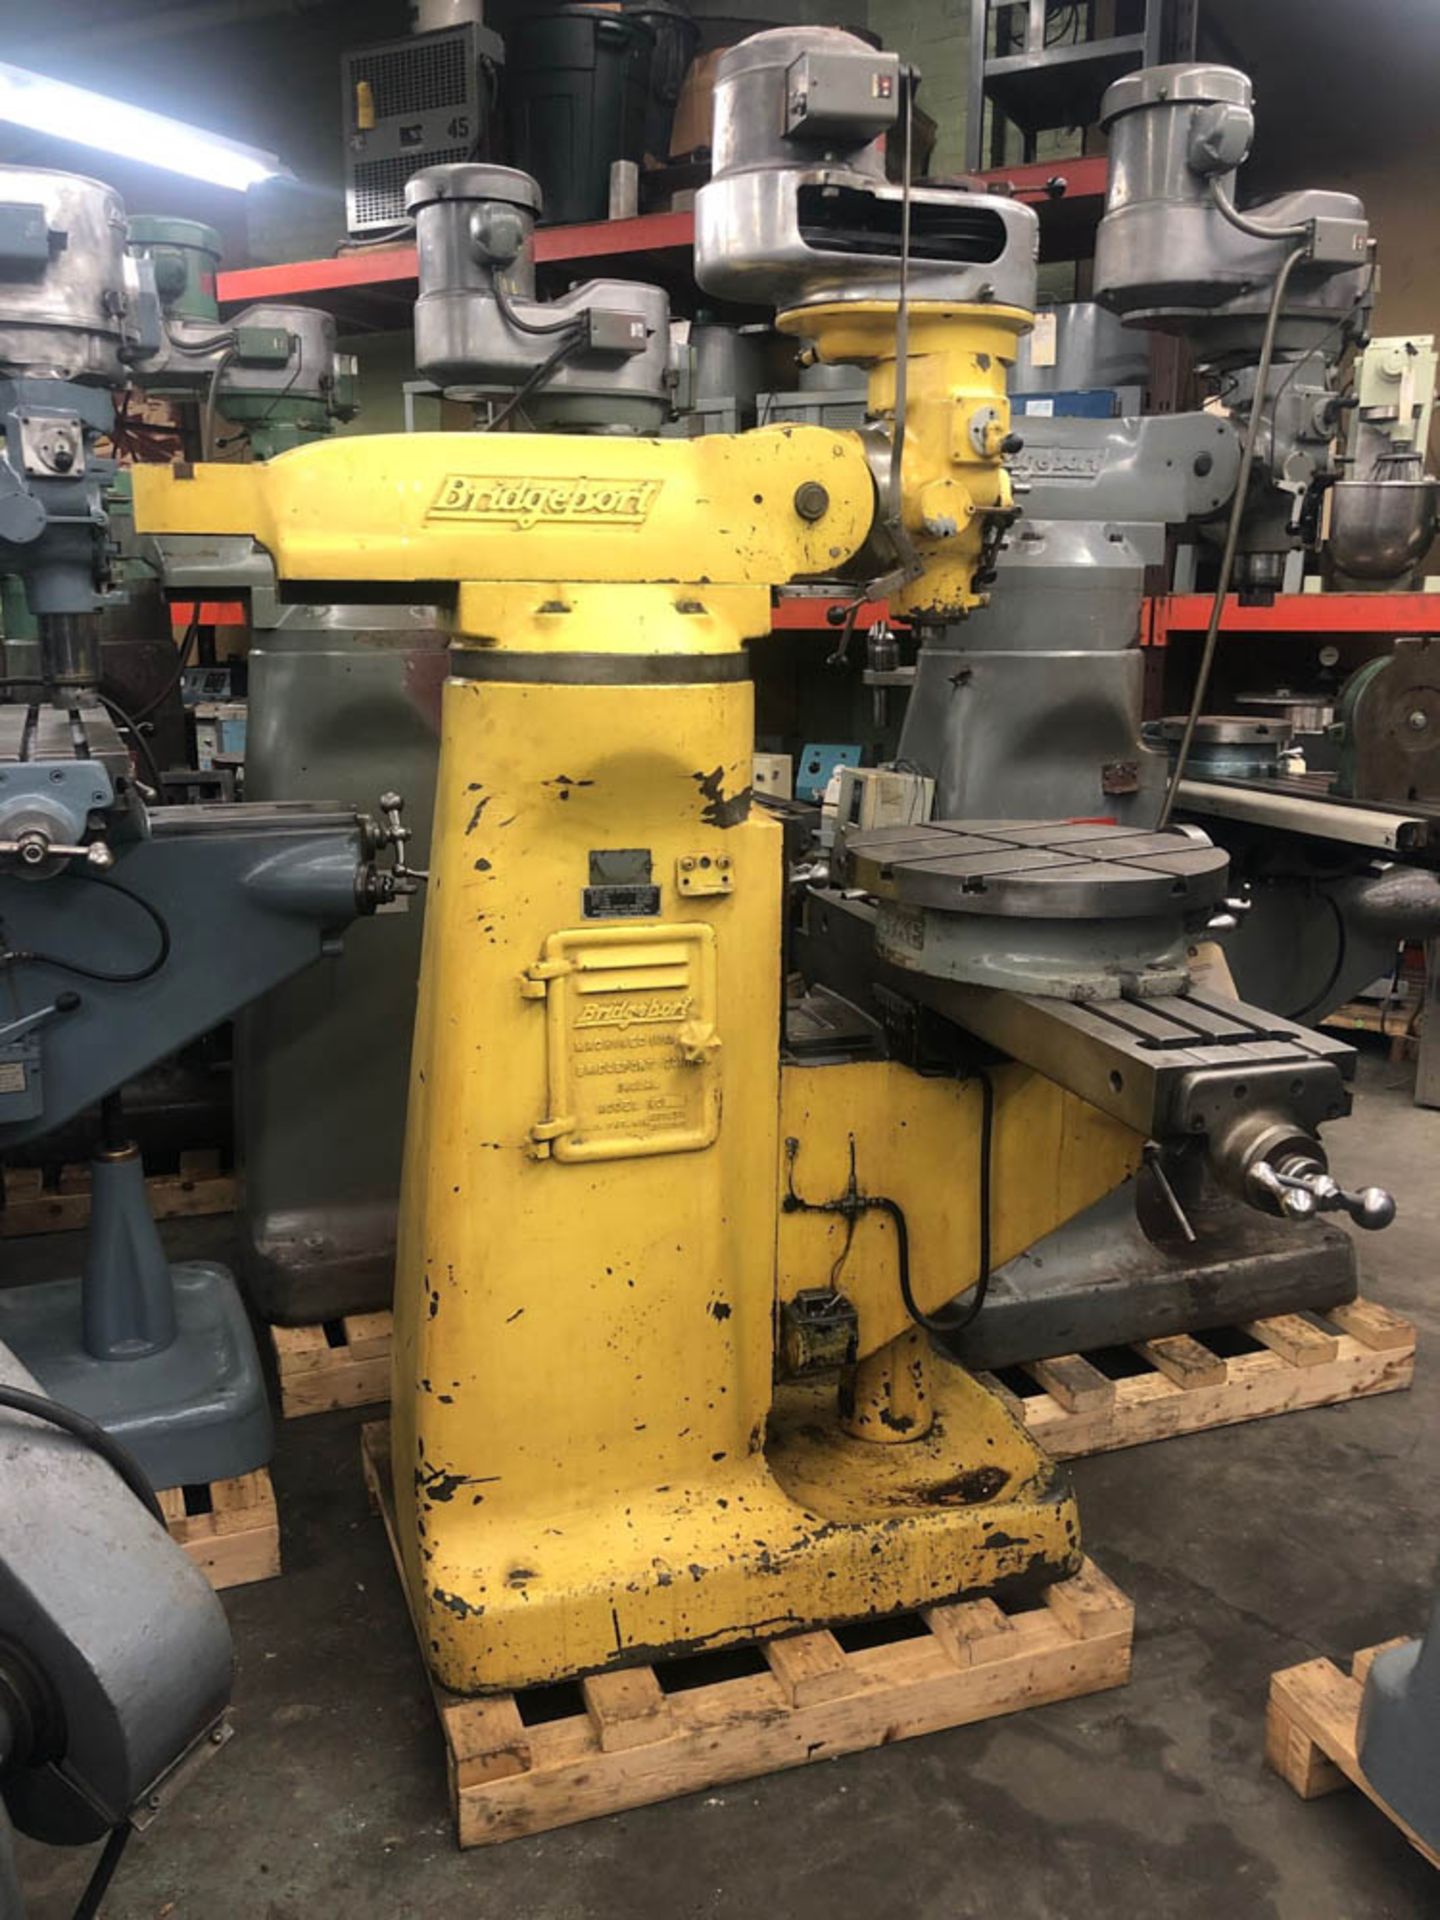 BRIDGEPORT 1HP VERTICAL MILLING MACHINE, 80-2720 RPM, 9" X 36" TABLE, S/N: 12BR 62544 (YELLOW) - Image 5 of 5